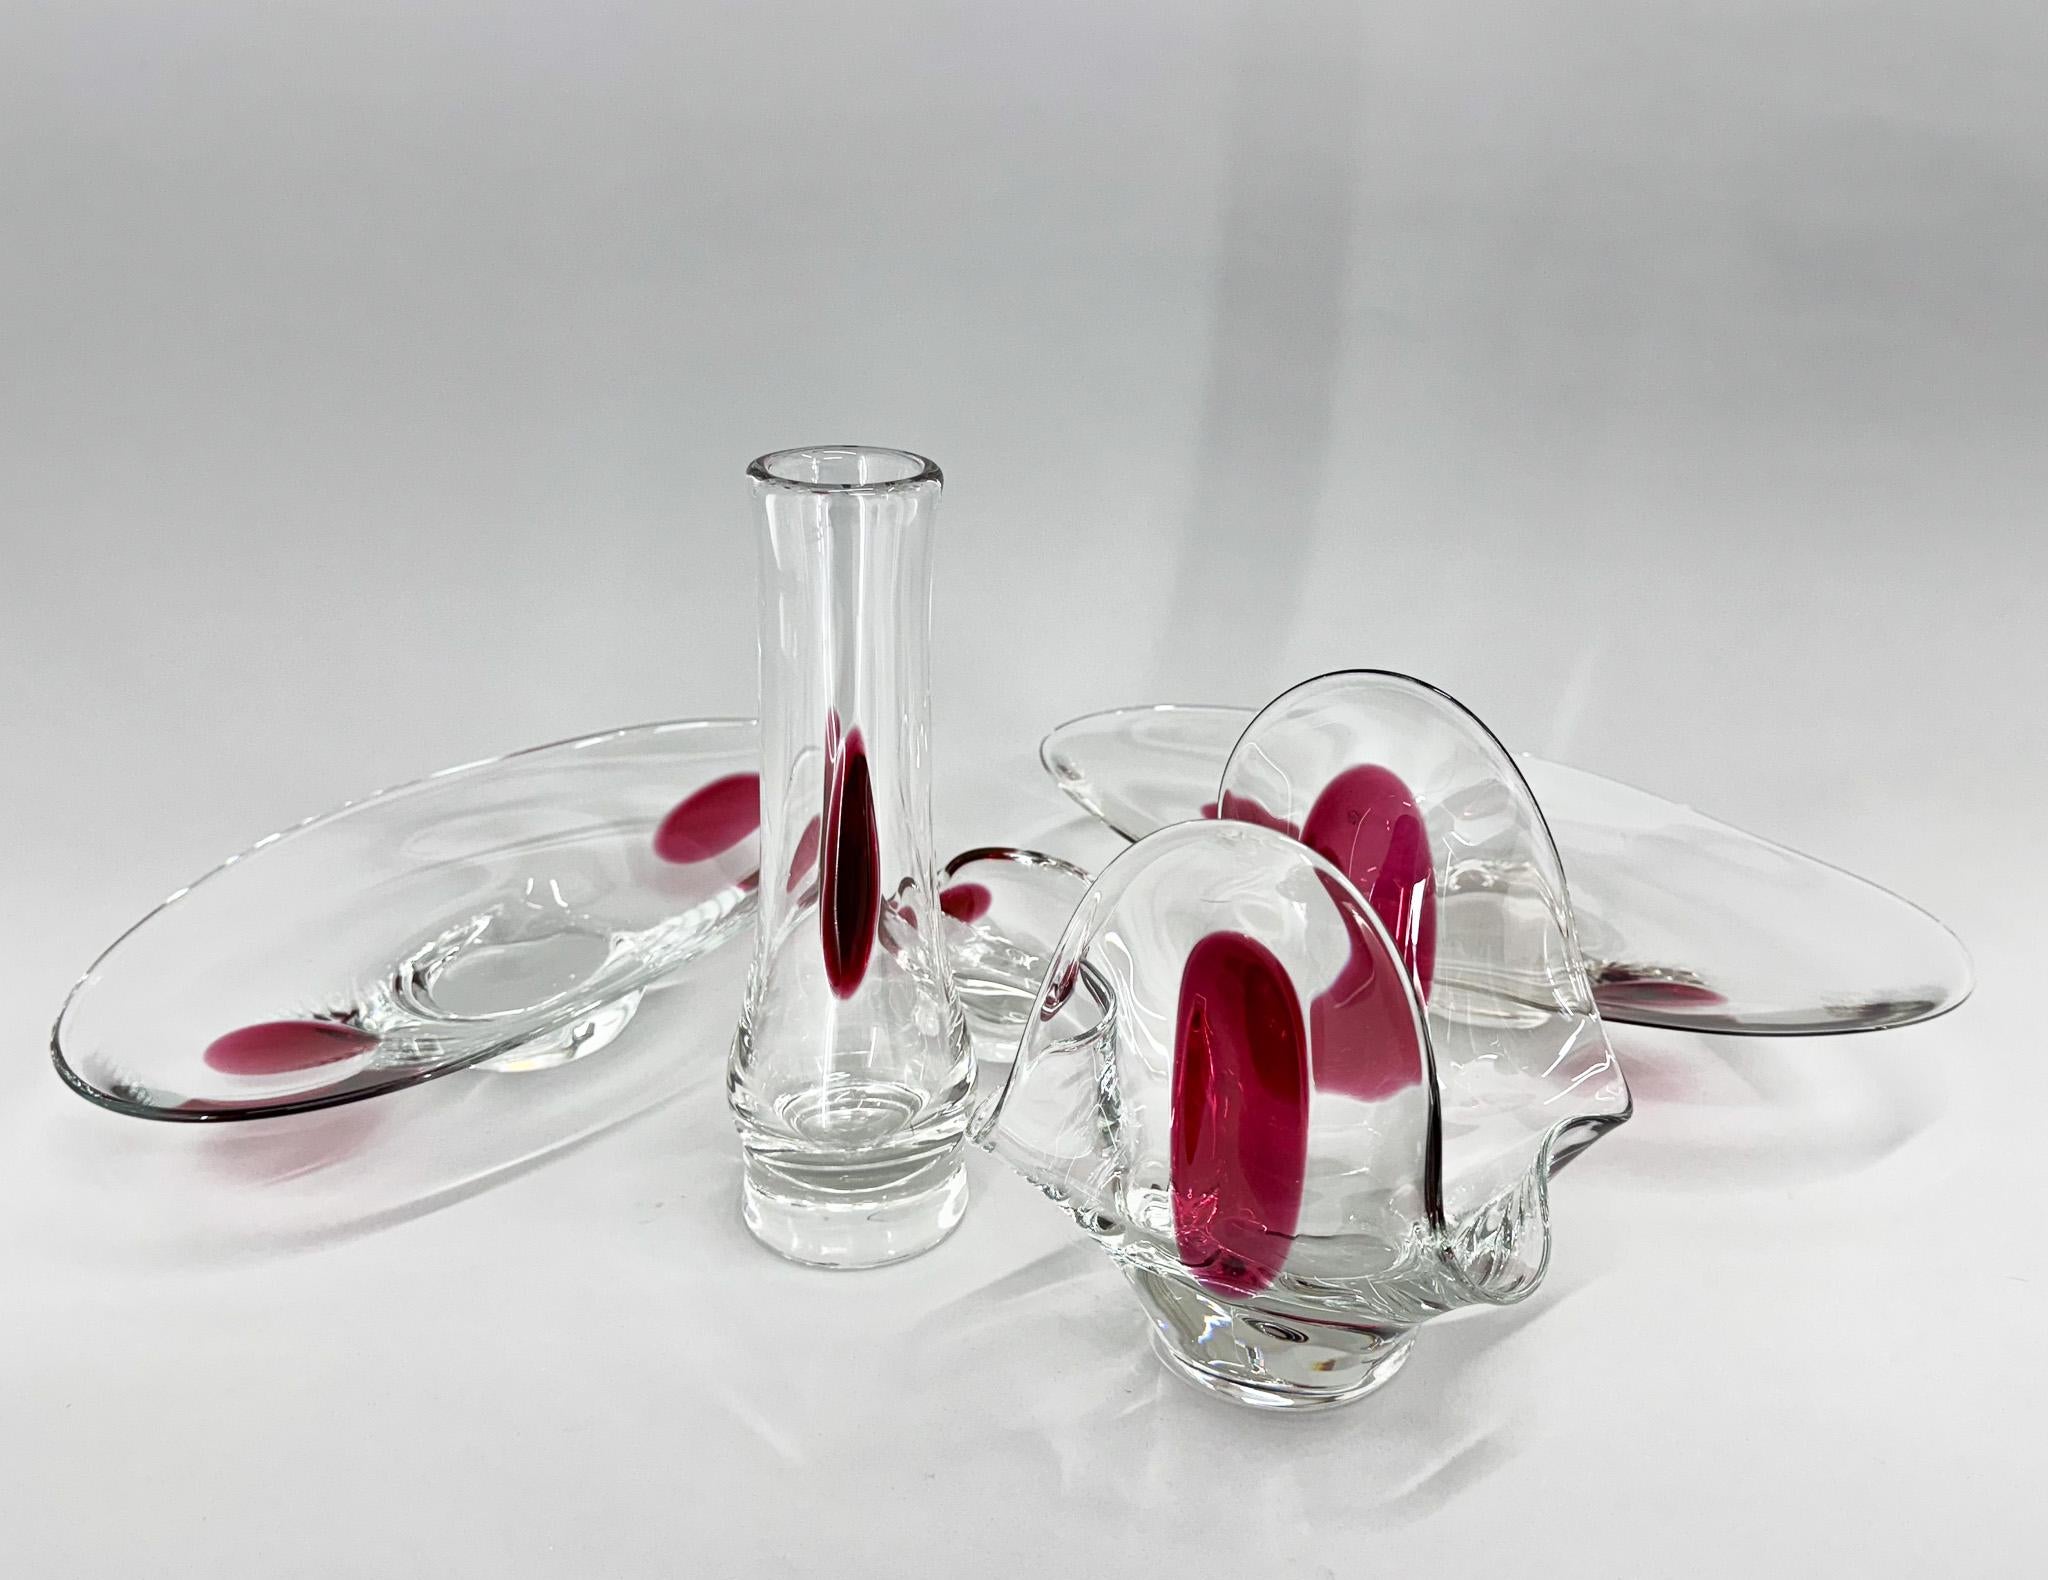 A set of five unique art glass pieces designed by Jaroslav Tabary and produced by Lednicke Roven glassworks in the 1970s in the former Czechoslovakia. Very rare to find a complete set like this. 